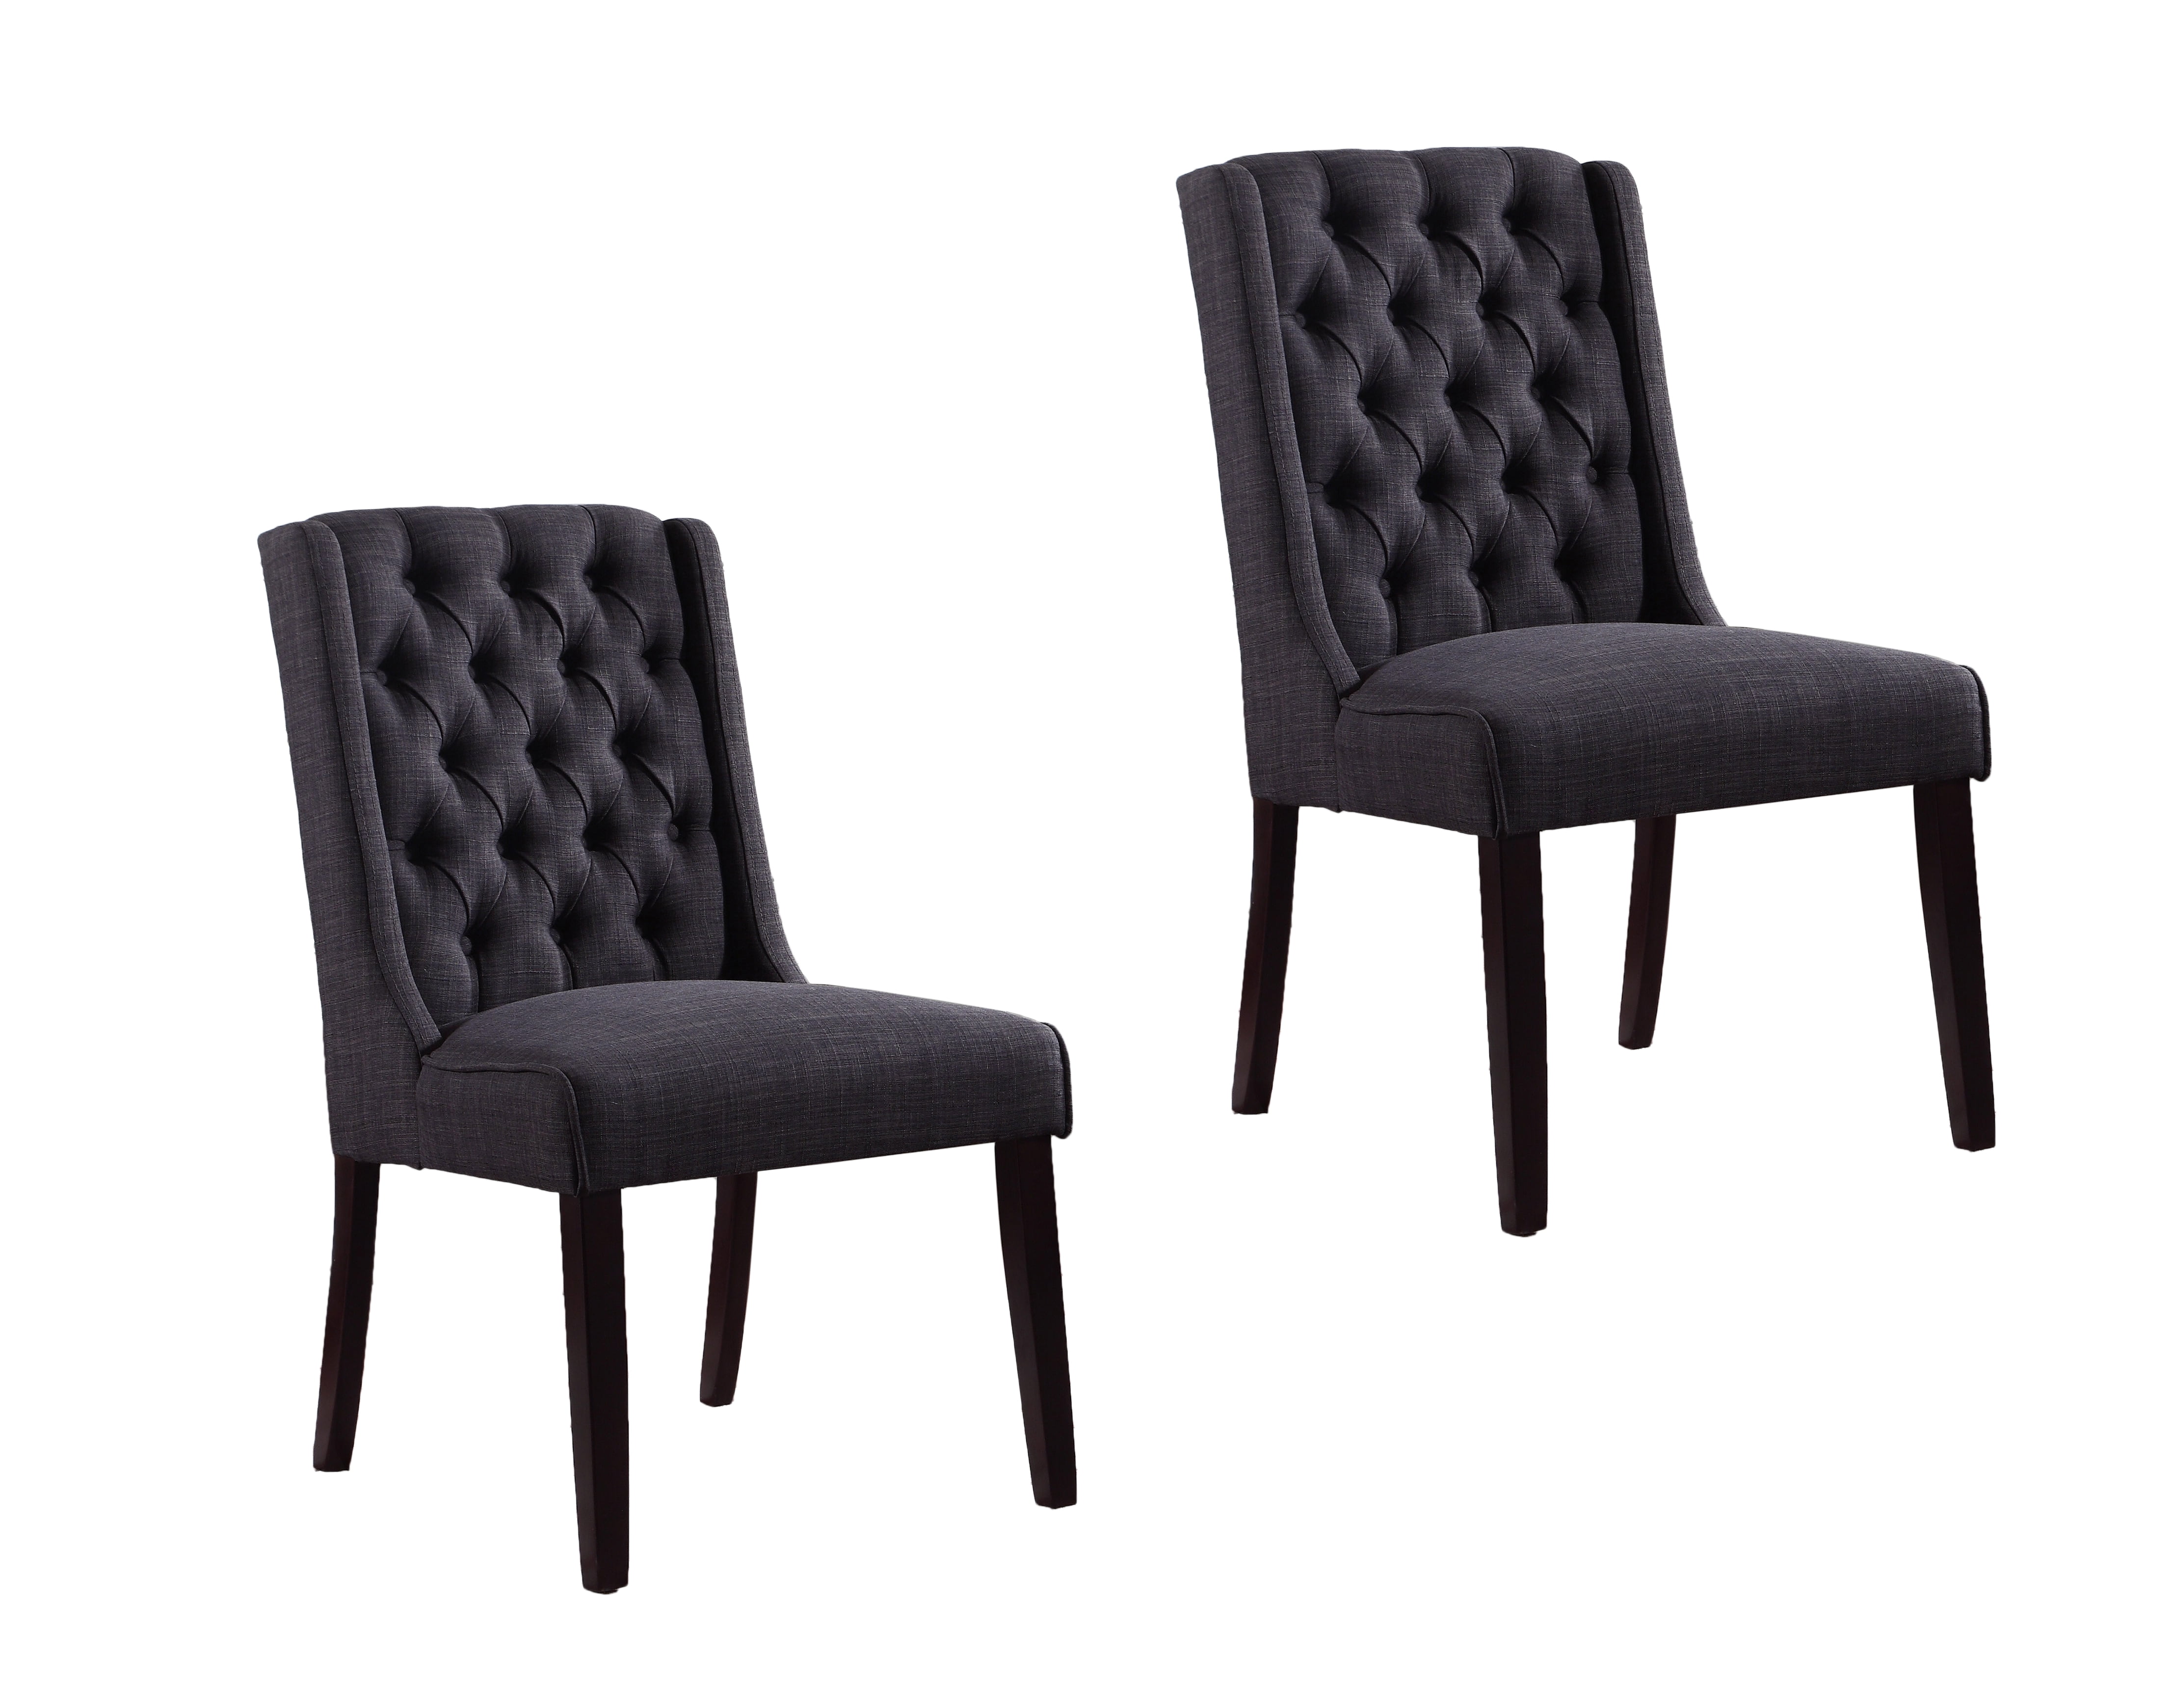 Best Master Furniture's Contemporary Tufted Wingback ...
